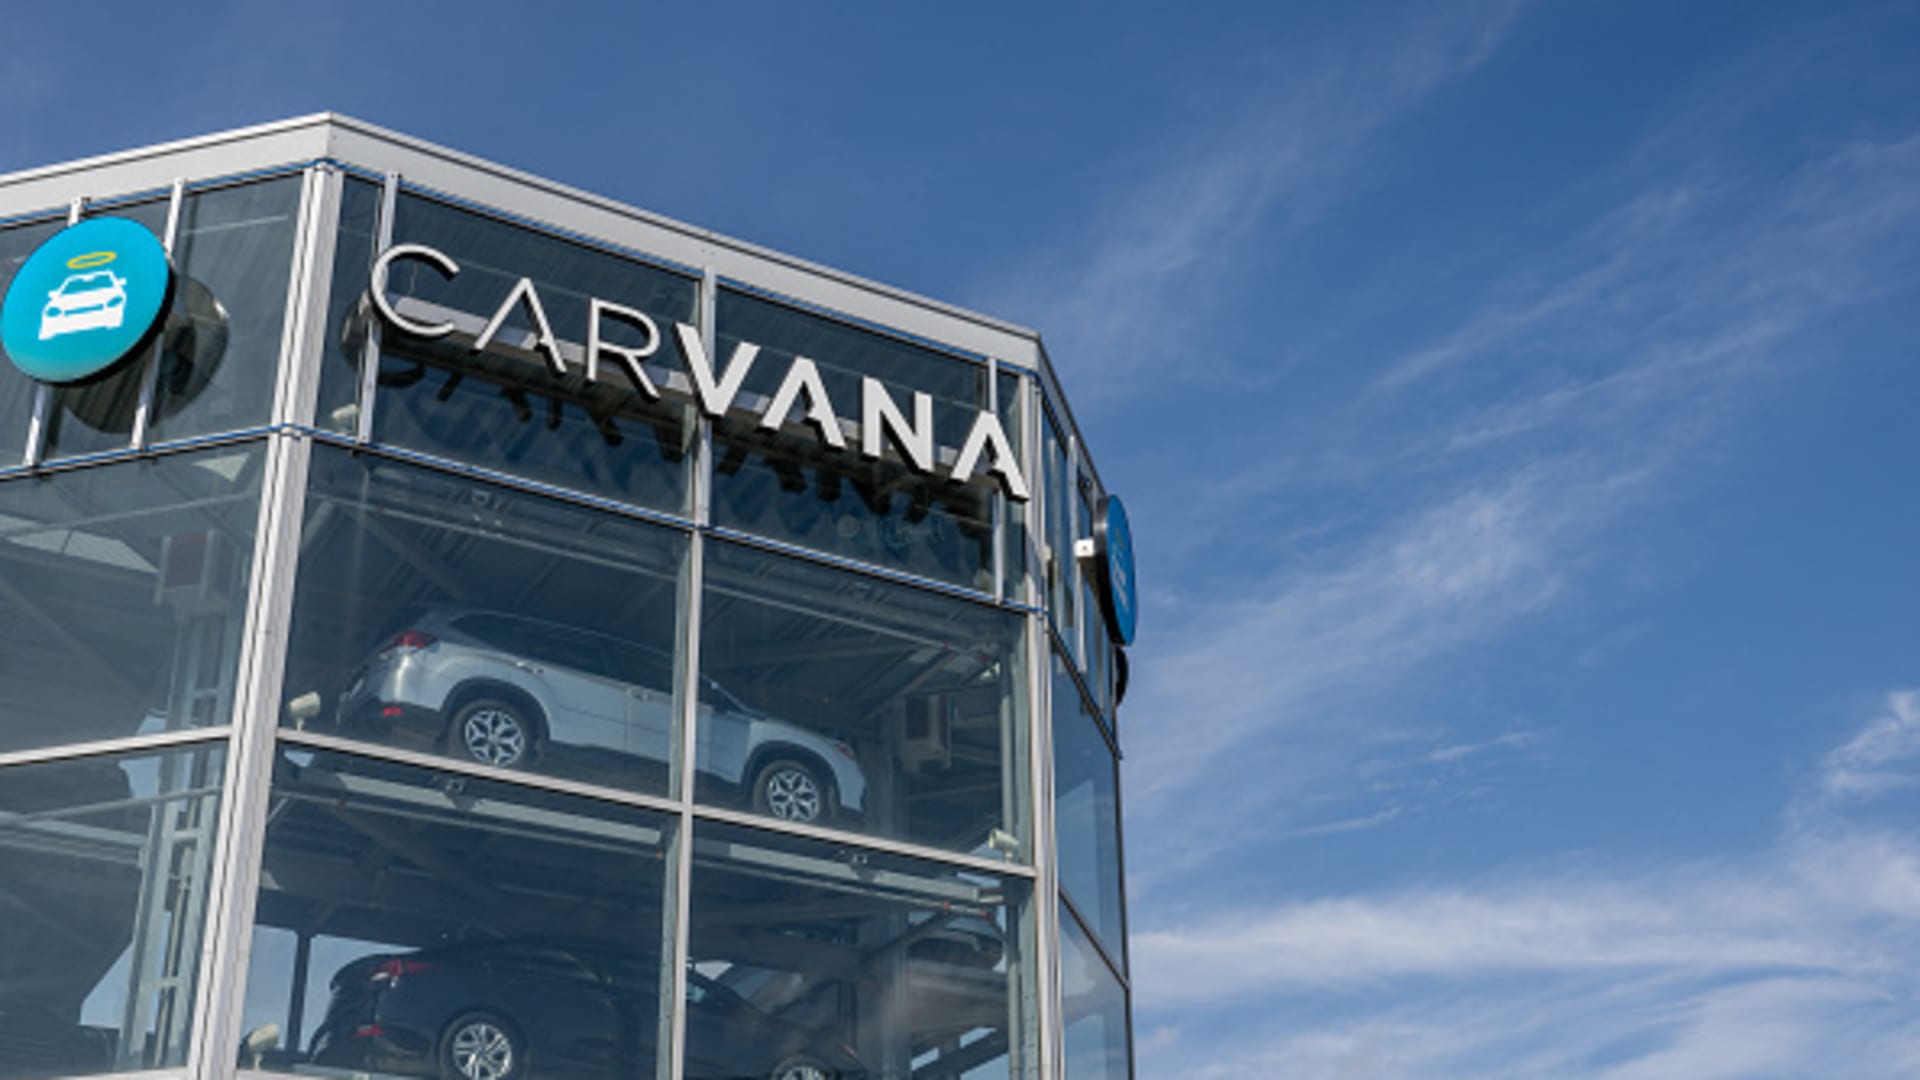 Here are Friday’s biggest analyst calls: Rivian, DraftKings, Nio, Fox, Carvana, Pfizer and more